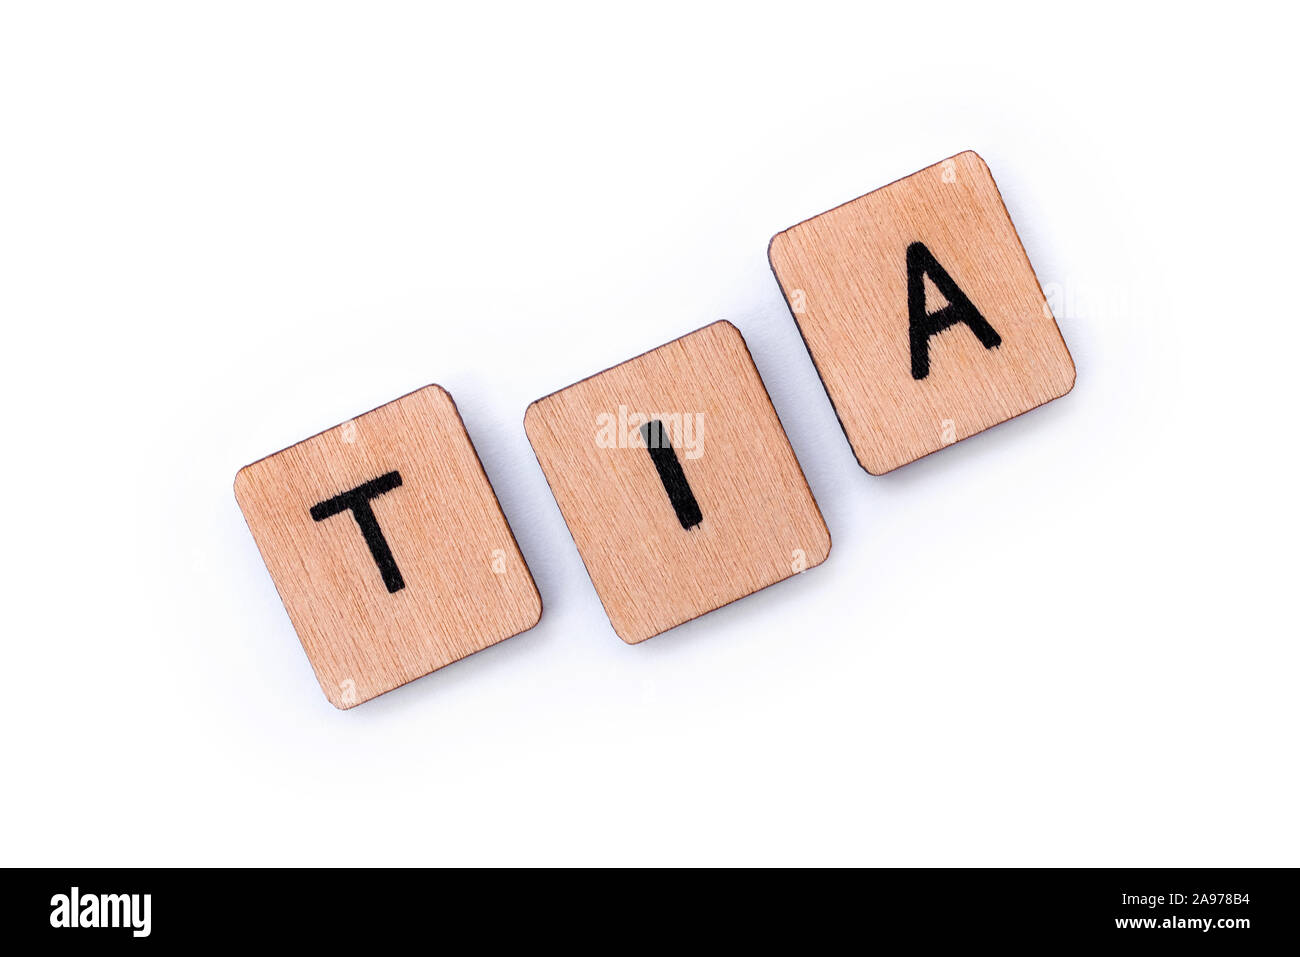 The abbreviation TIA - meaning Transient Ischemic Attack - the medical term for a mini-stroke, spelt with wooden letter tiles over a white background. Stock Photo